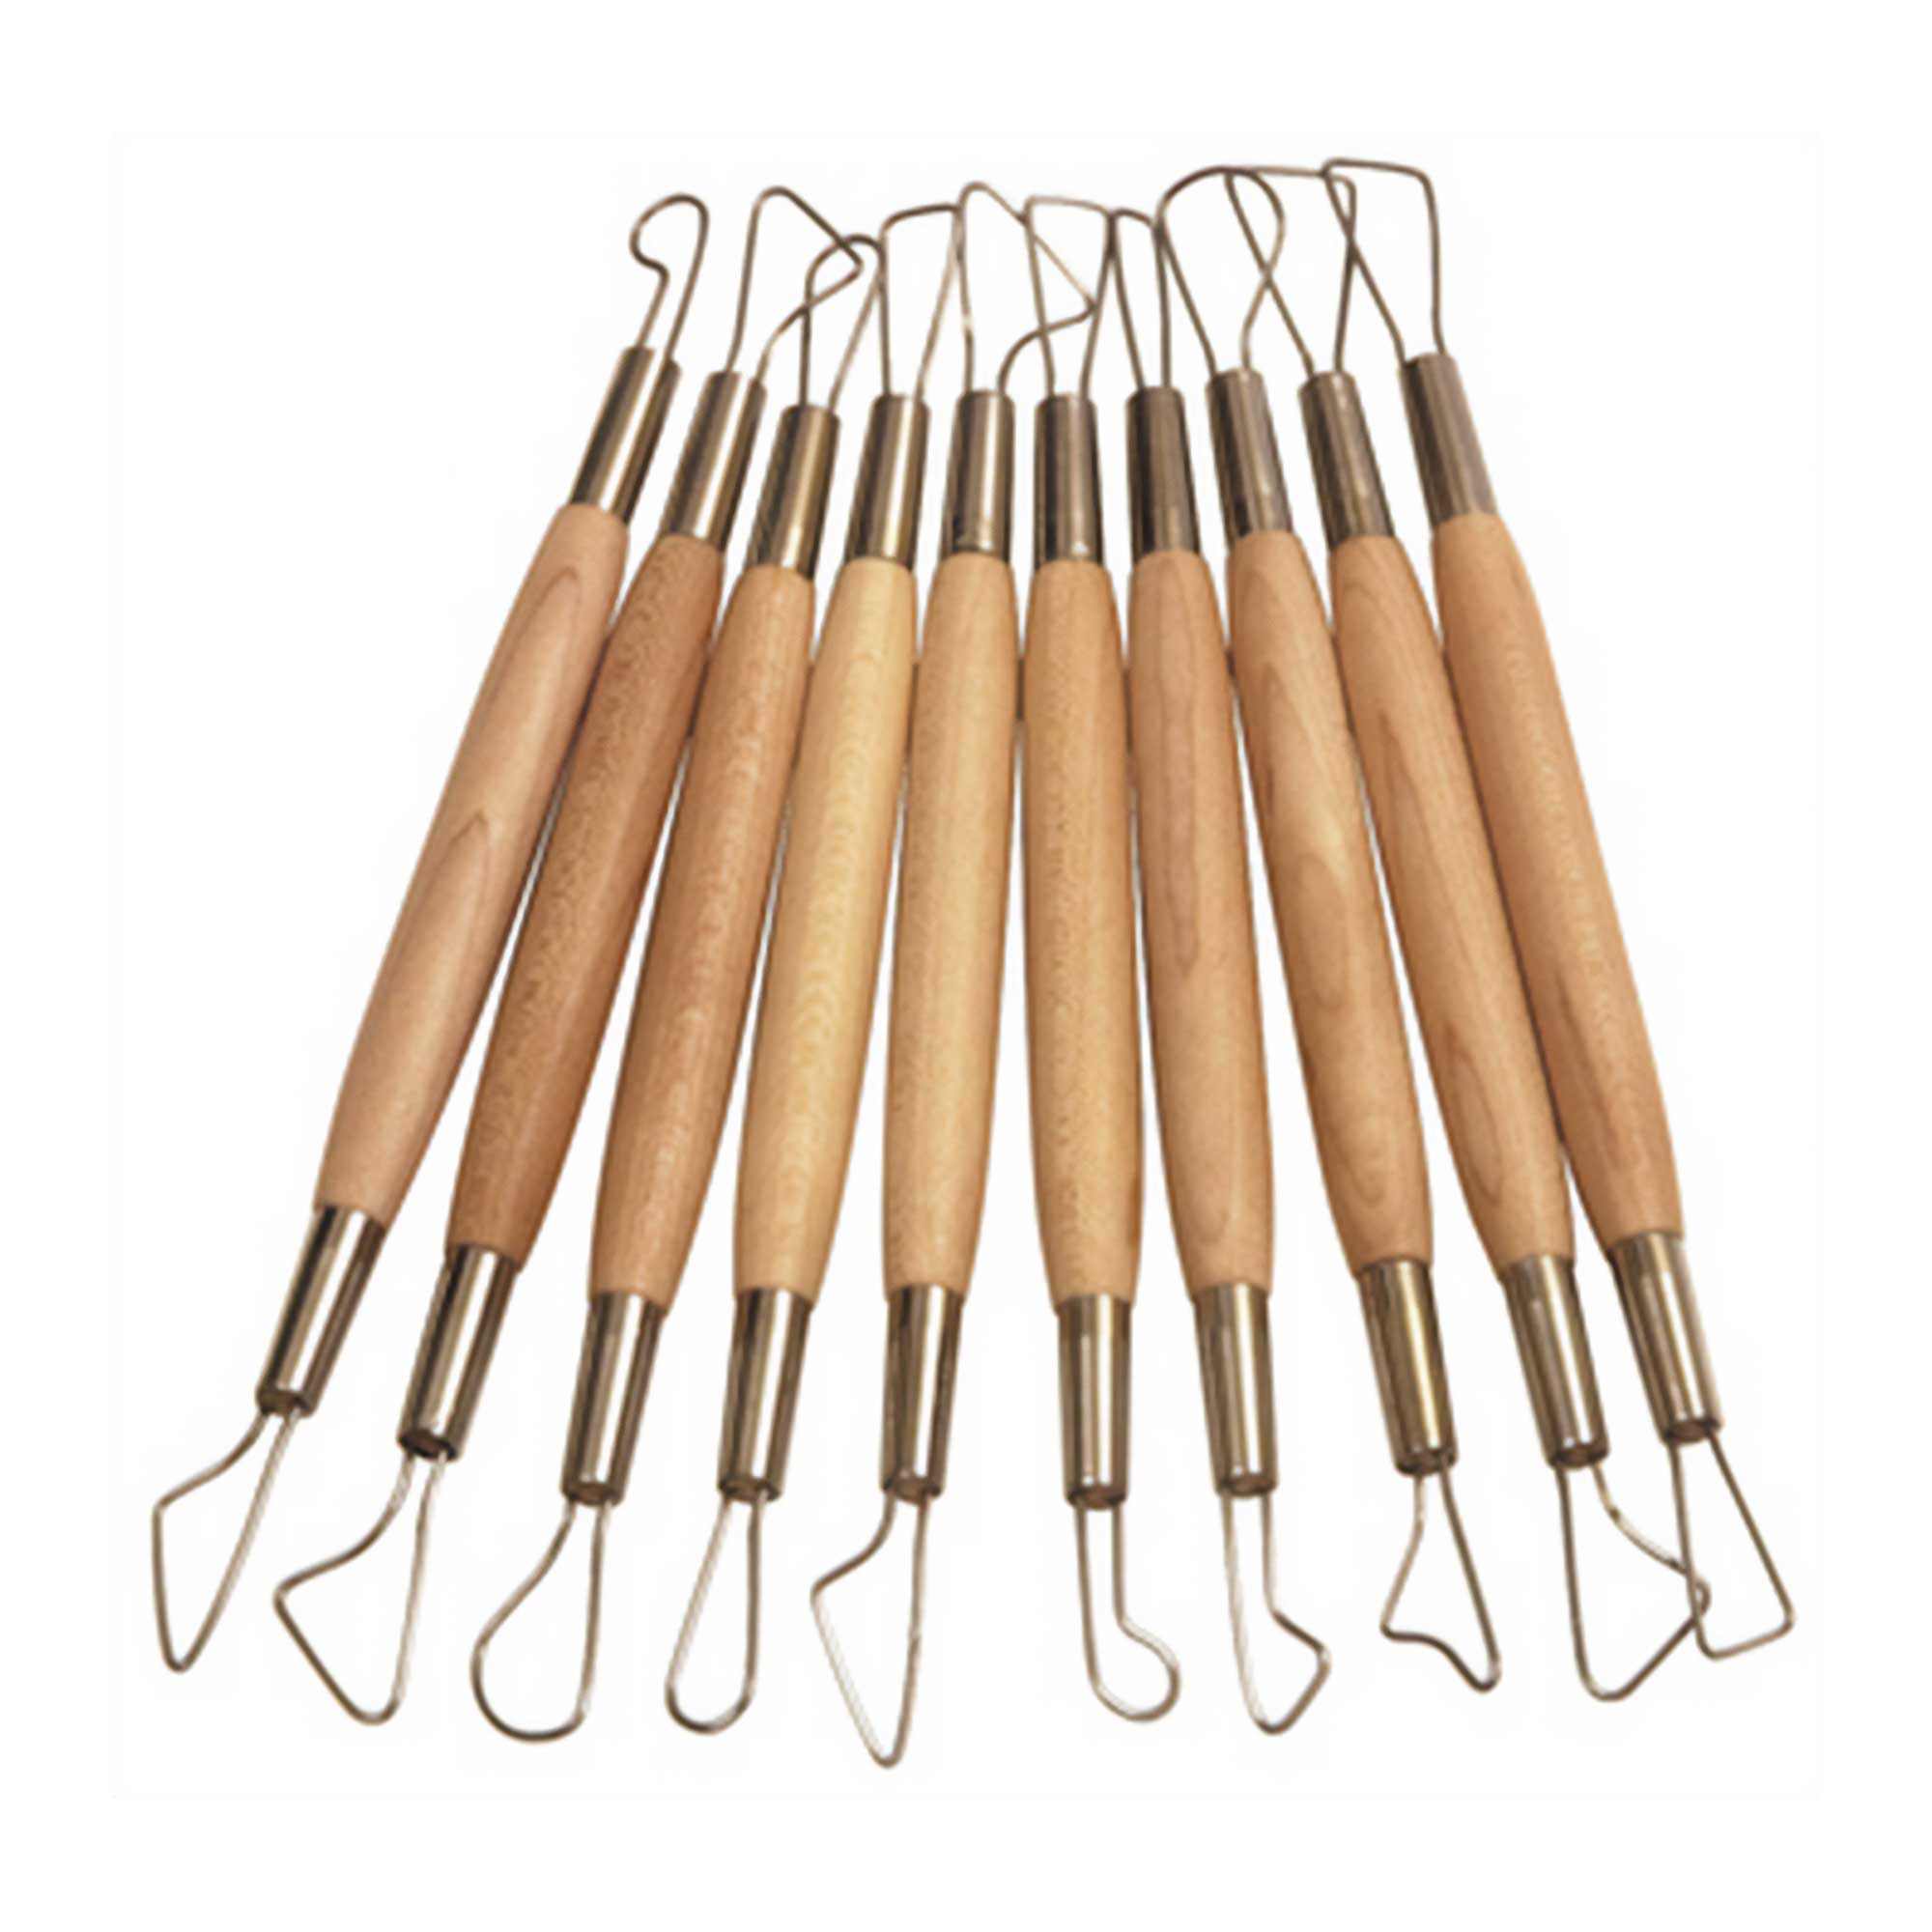 Jakar 6" Assorted Wooden Modelling Tools (Wire Ended Both Ends)